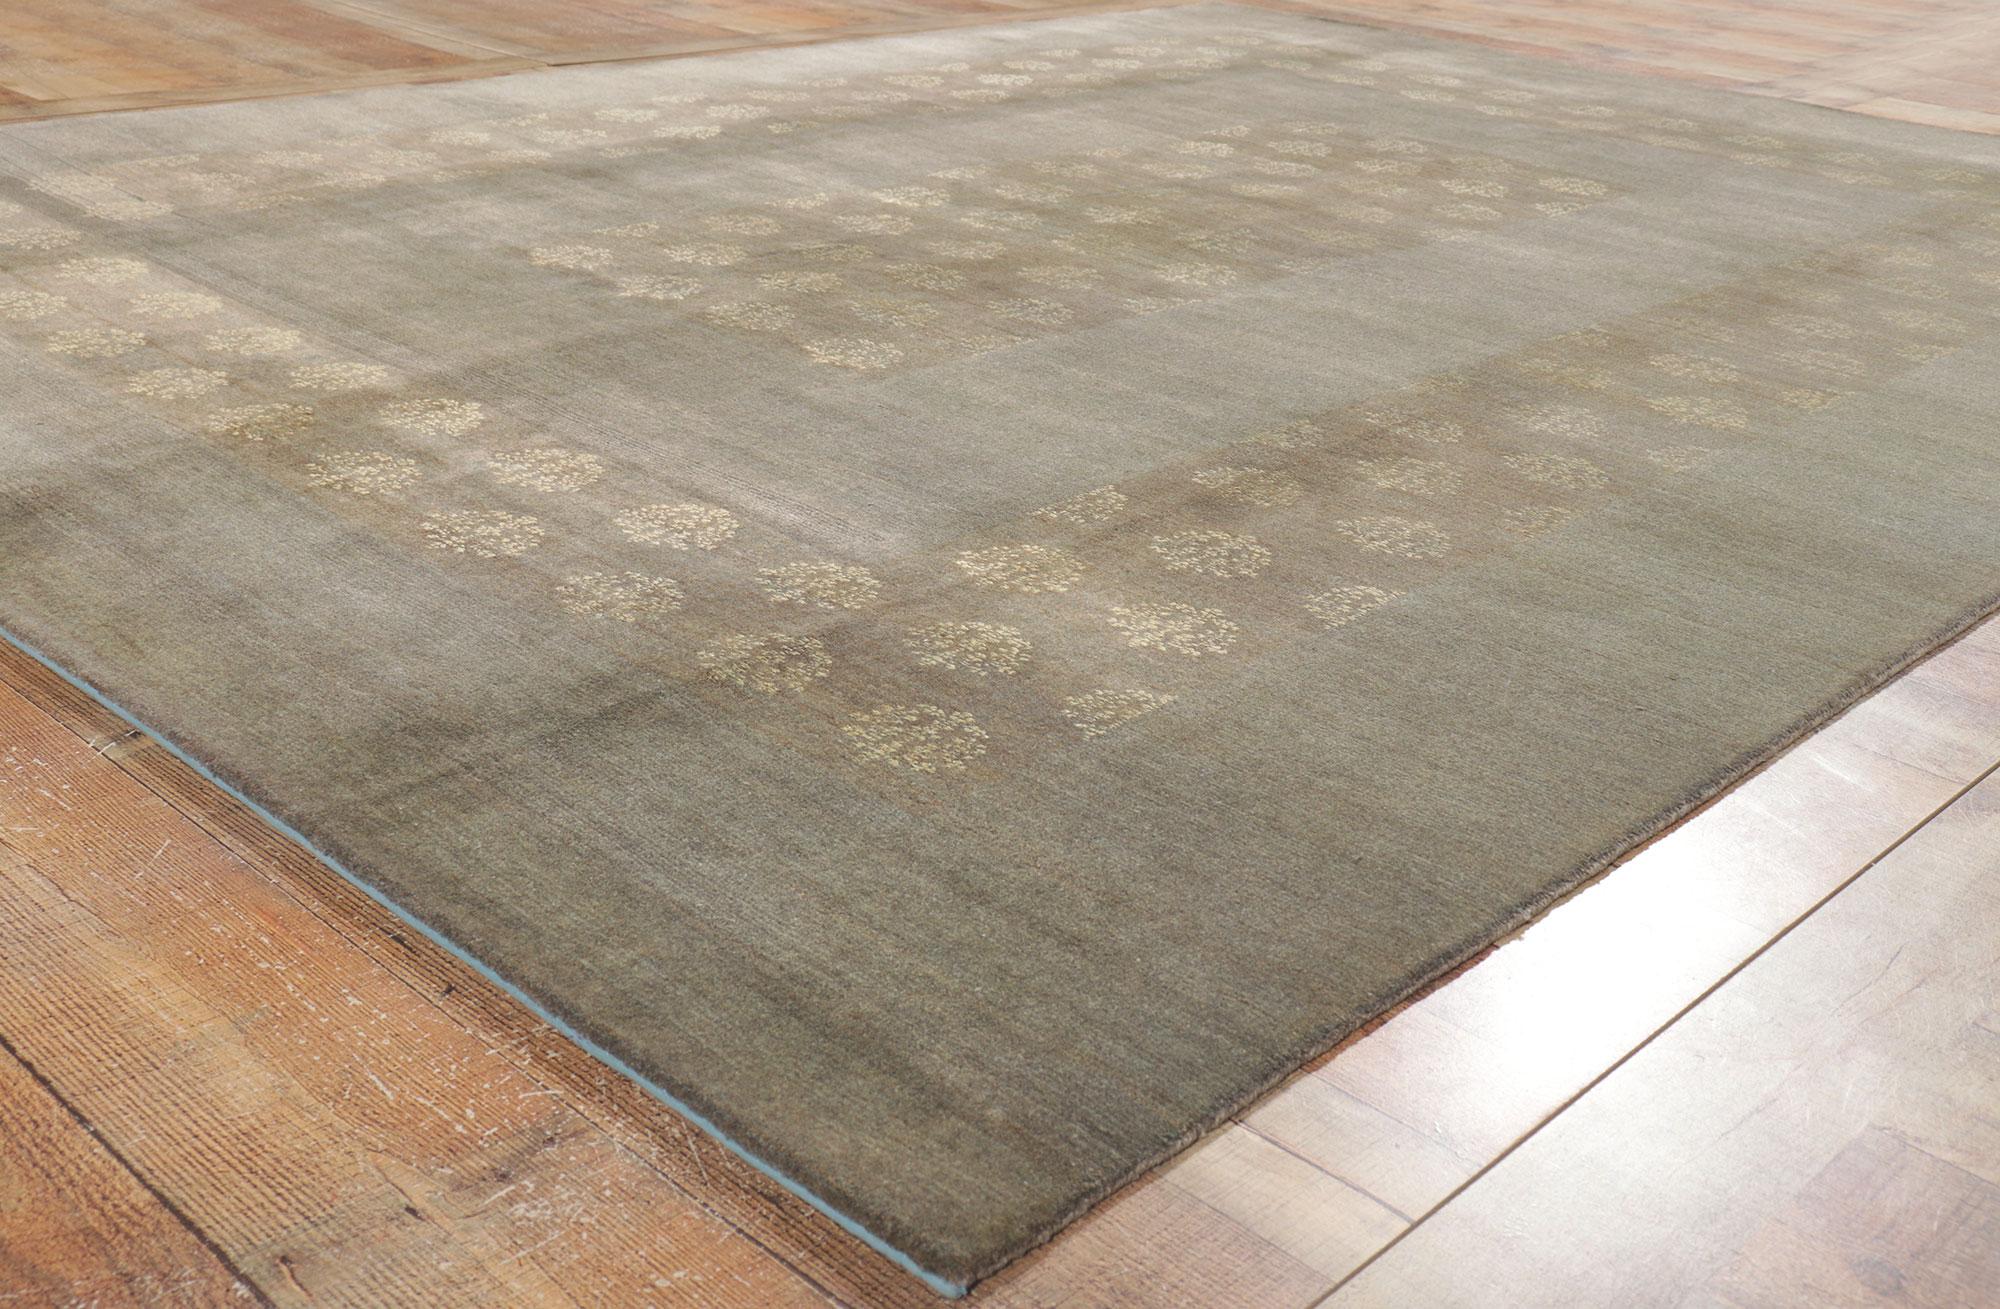 Indian New Transitional Area Rug with Neutral Earth-Tone Colors For Sale